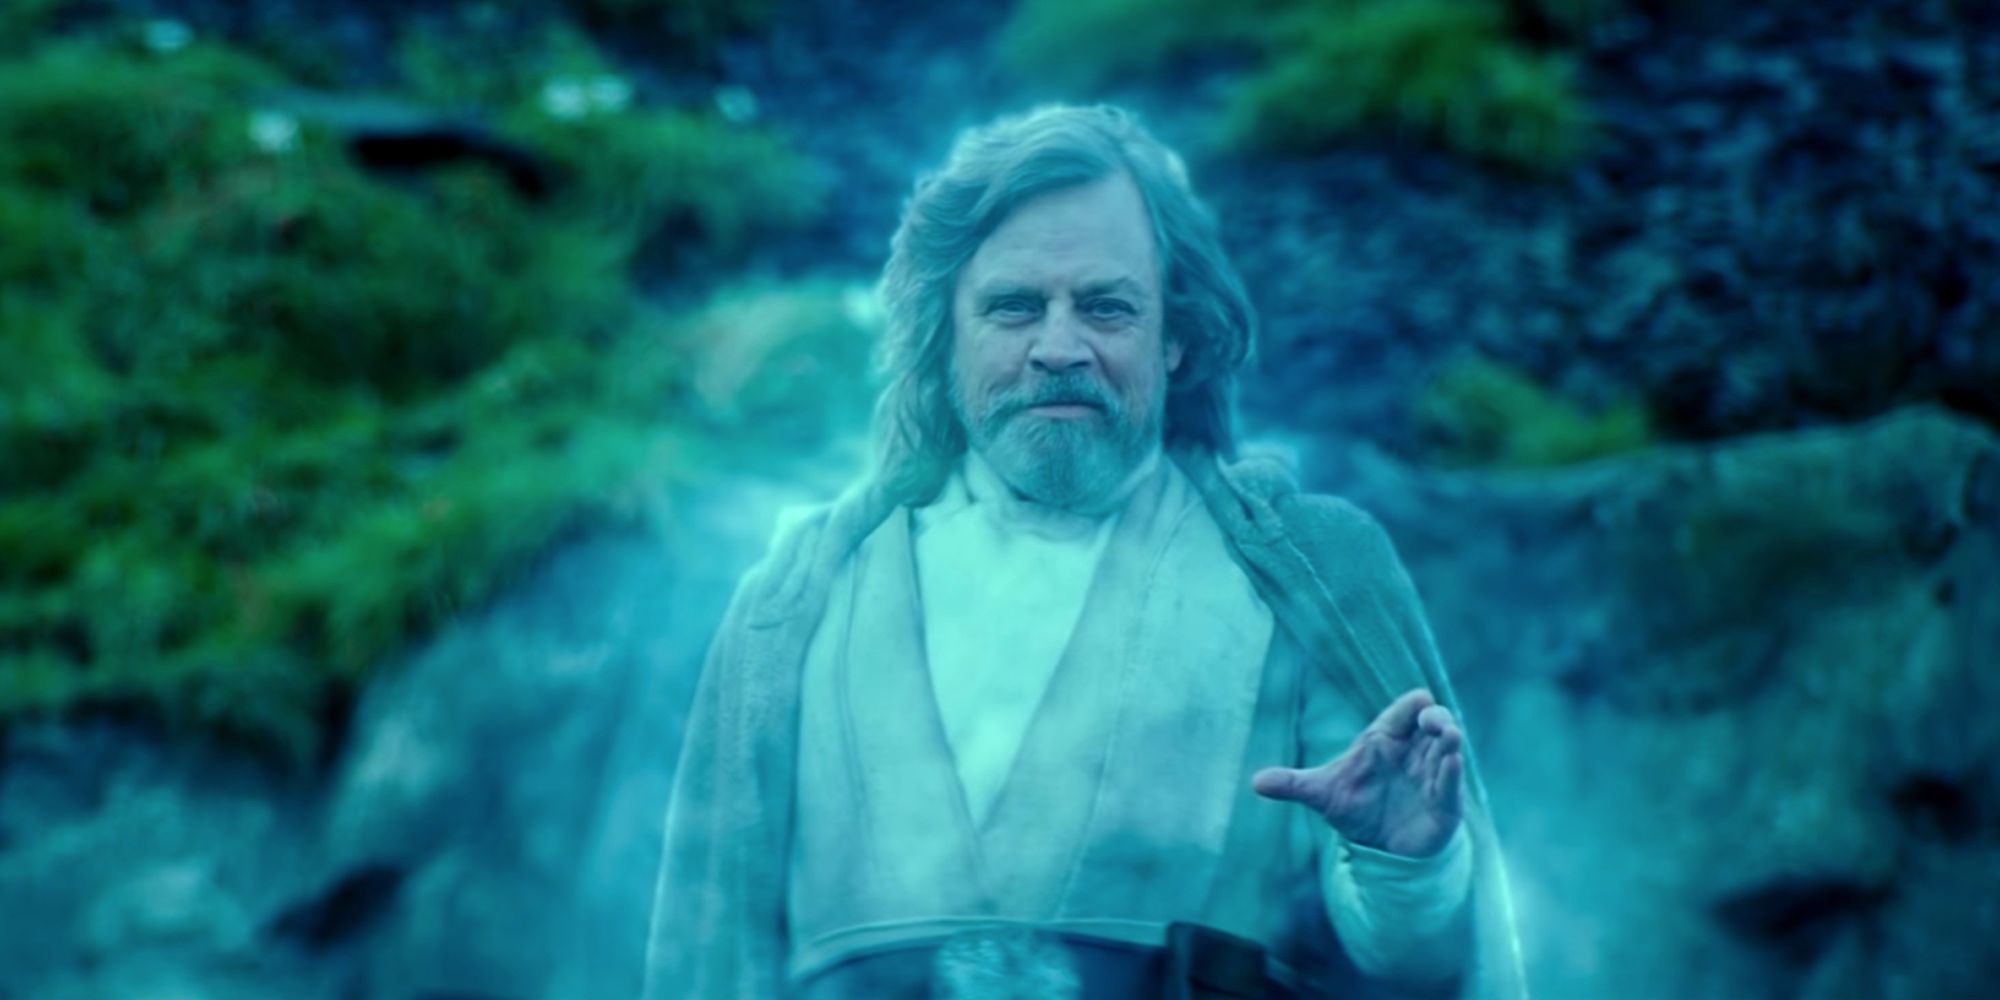 Luke comes back as a Force Spirit and raises his x-wing from the ocean on Ach-To in Star Wars